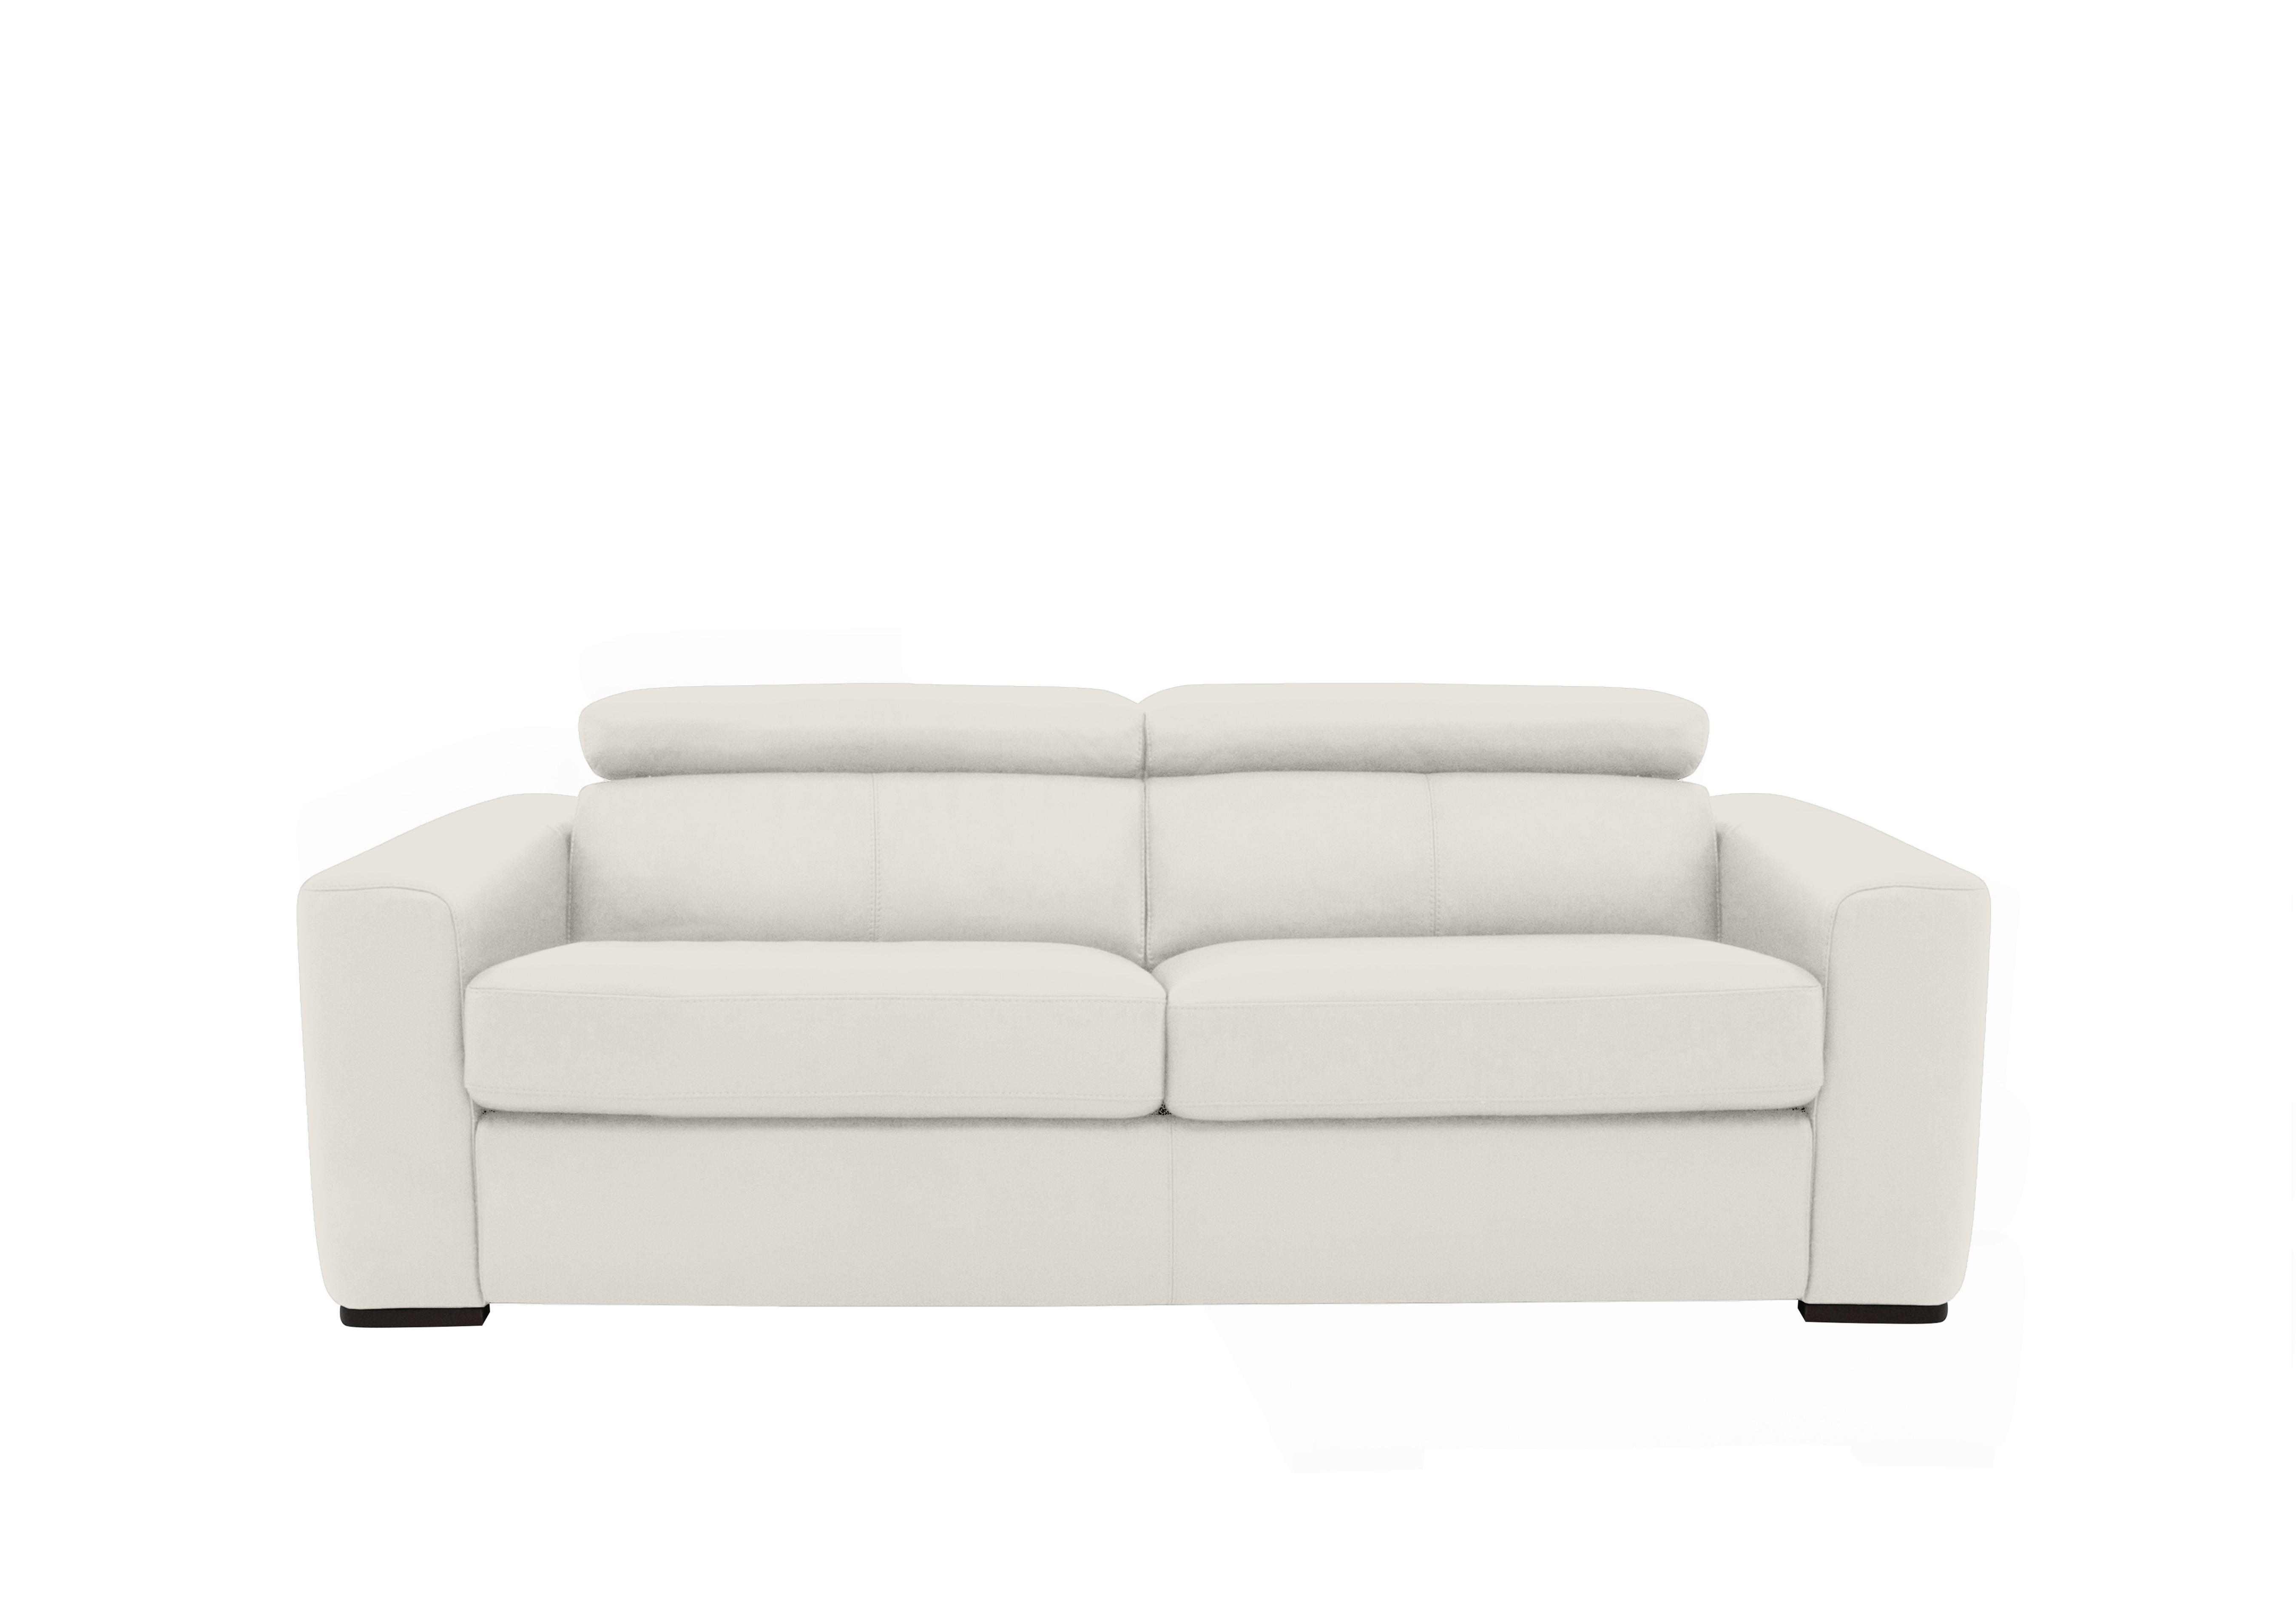 Infinity 3 Seater Leather Sofa Bed in Bv-744d Star White on Furniture Village